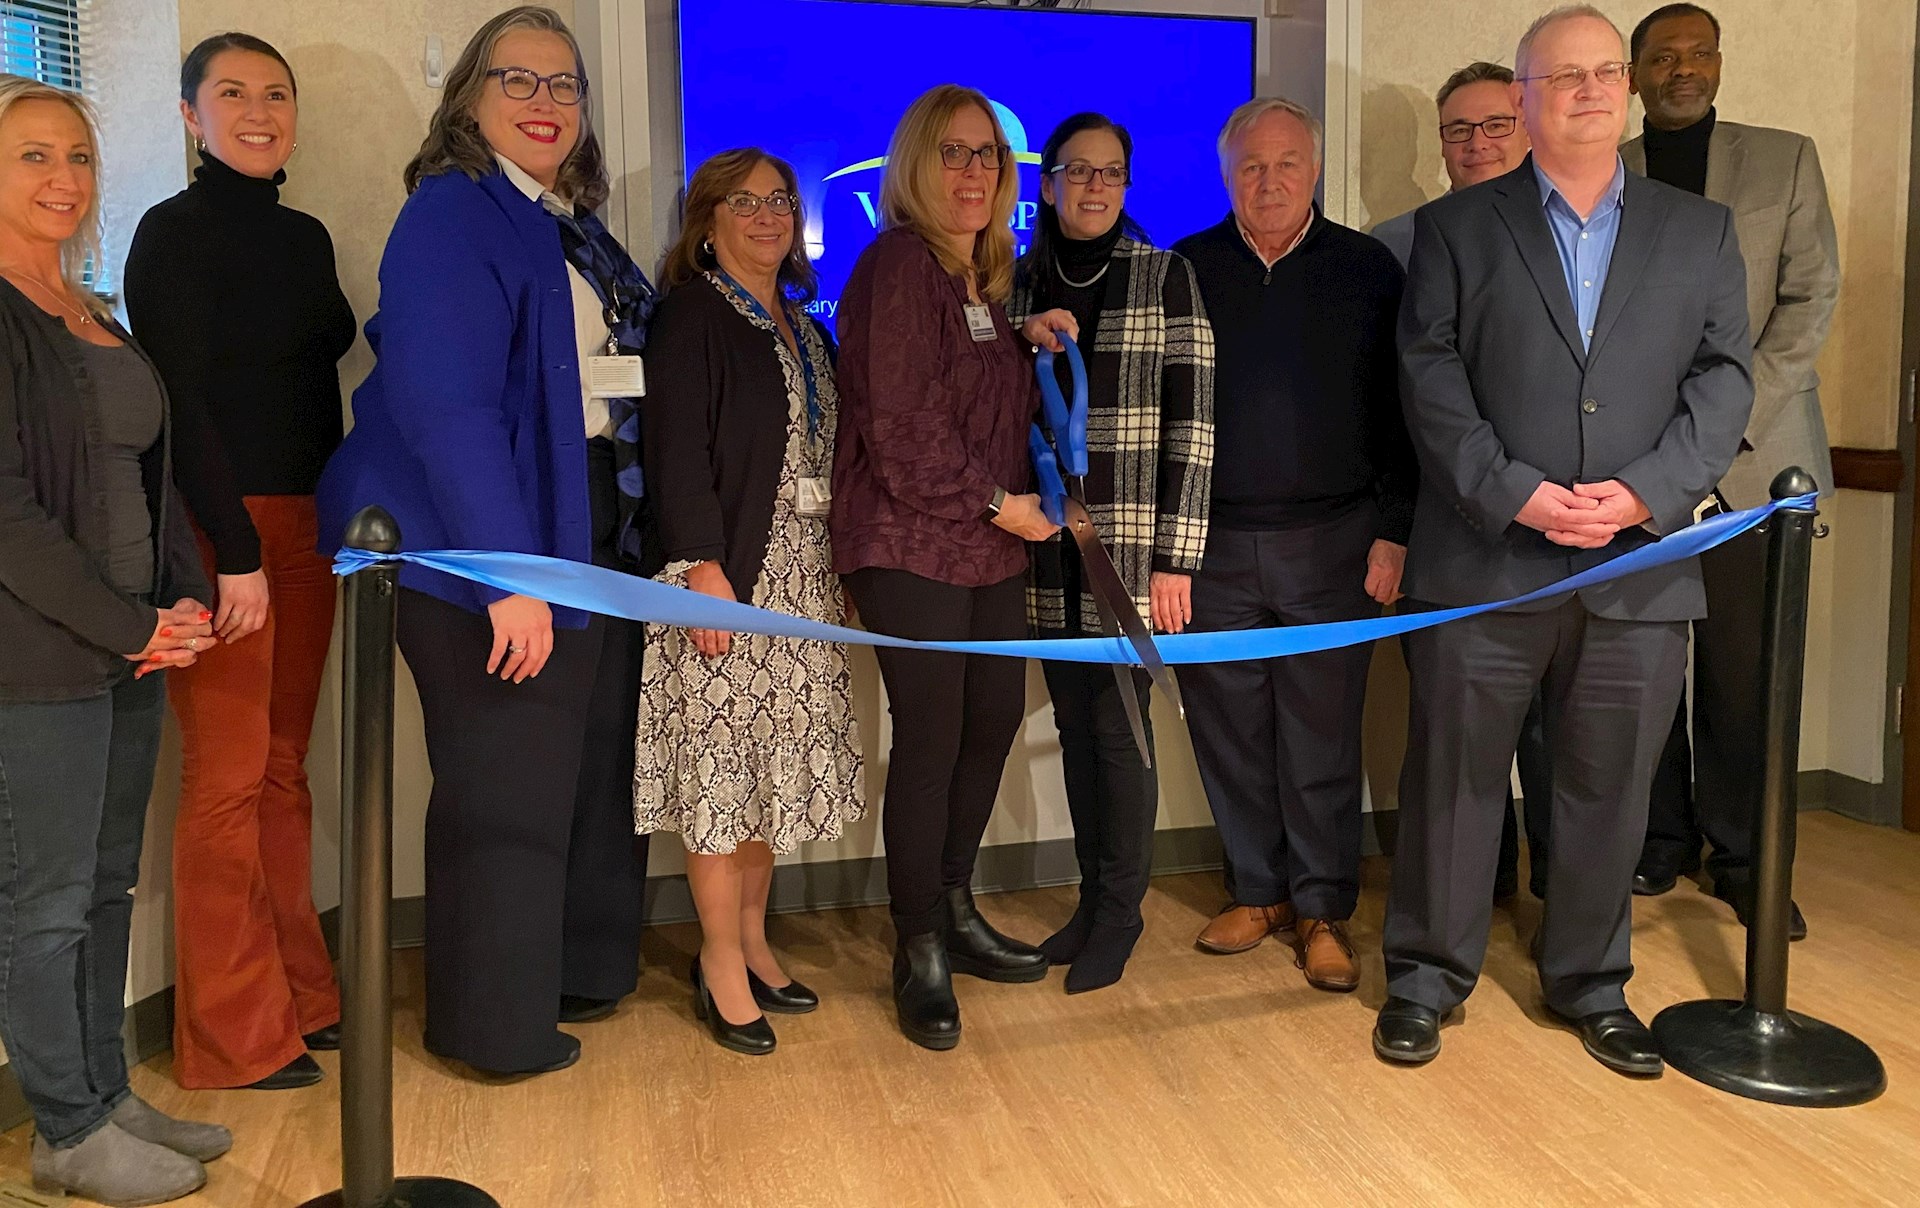 WellSpan Health expands behavioral health program in York in newly renovated location providing easier access for patients